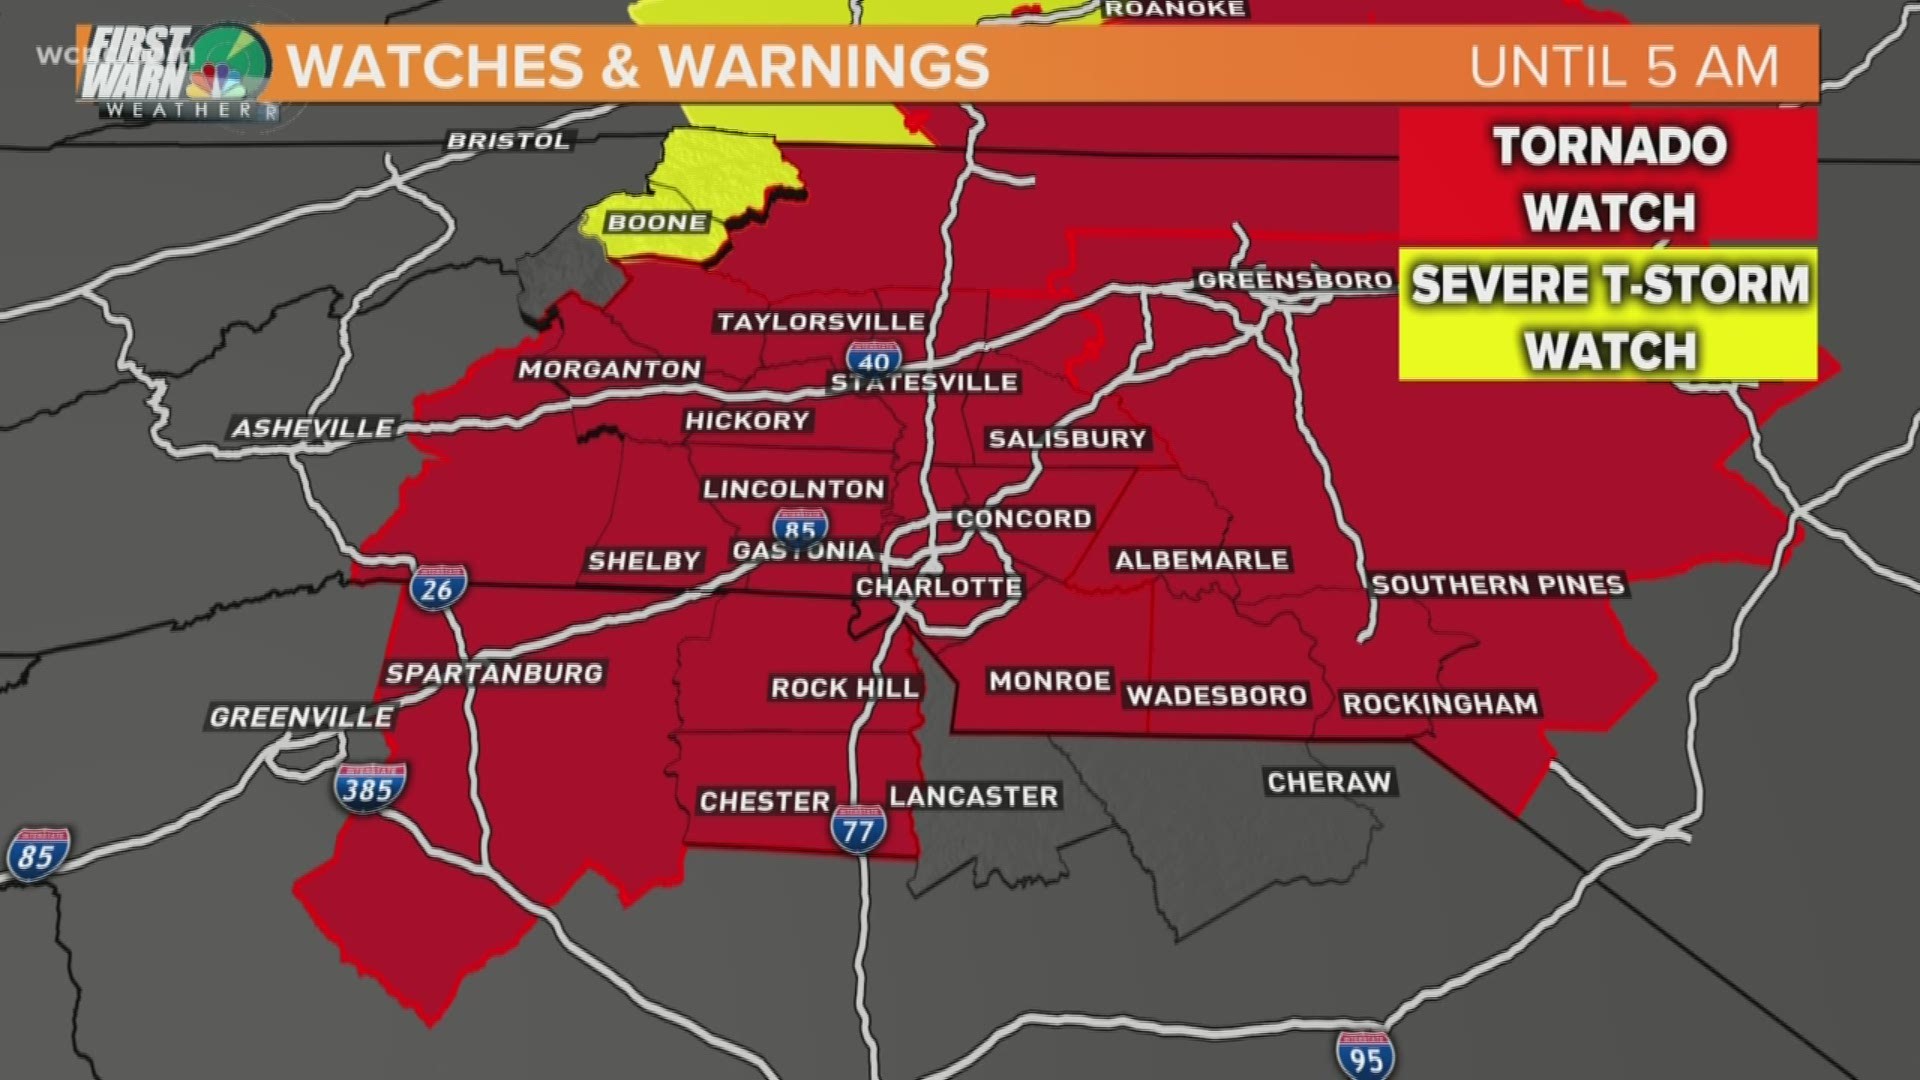 Winds continue to push through the Carolinas, and a line of storms is pushing through the region with an extended tornado watch in place until 5 a.m. for several counties, including Mecklenburg County.